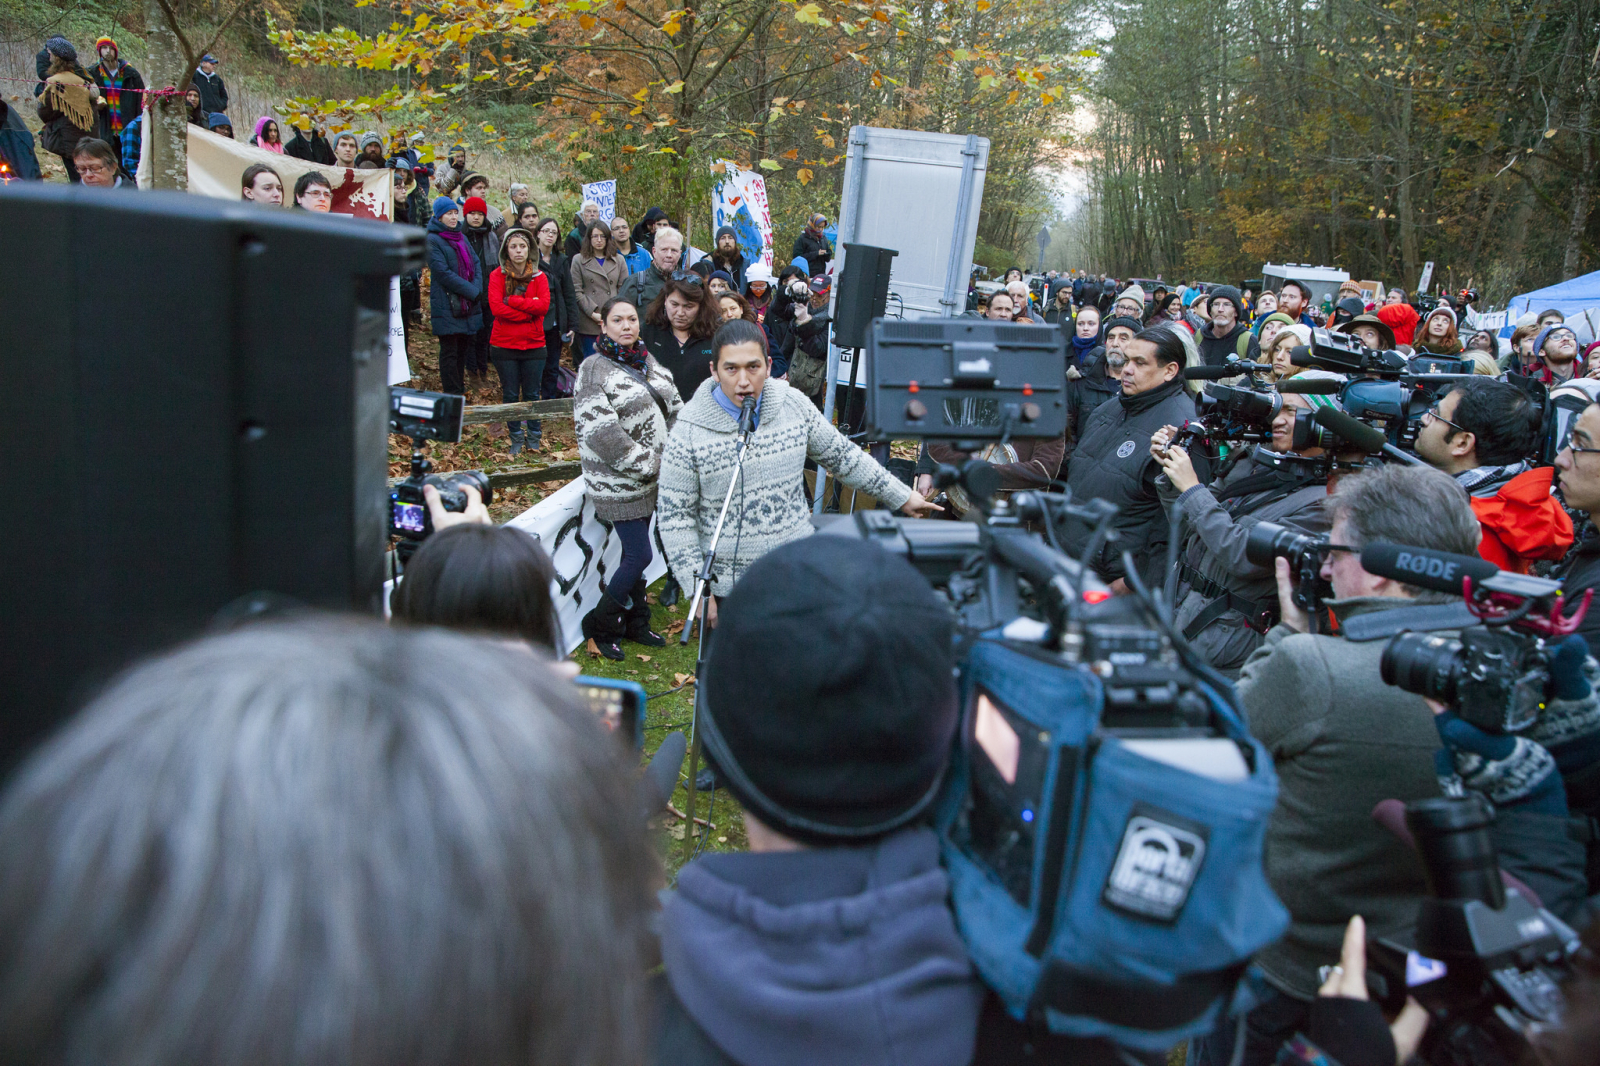 Kinder Morgan Burnaby Mountain protests in 2014 drew hundreds of people - photo by Mychaylo Prystupa